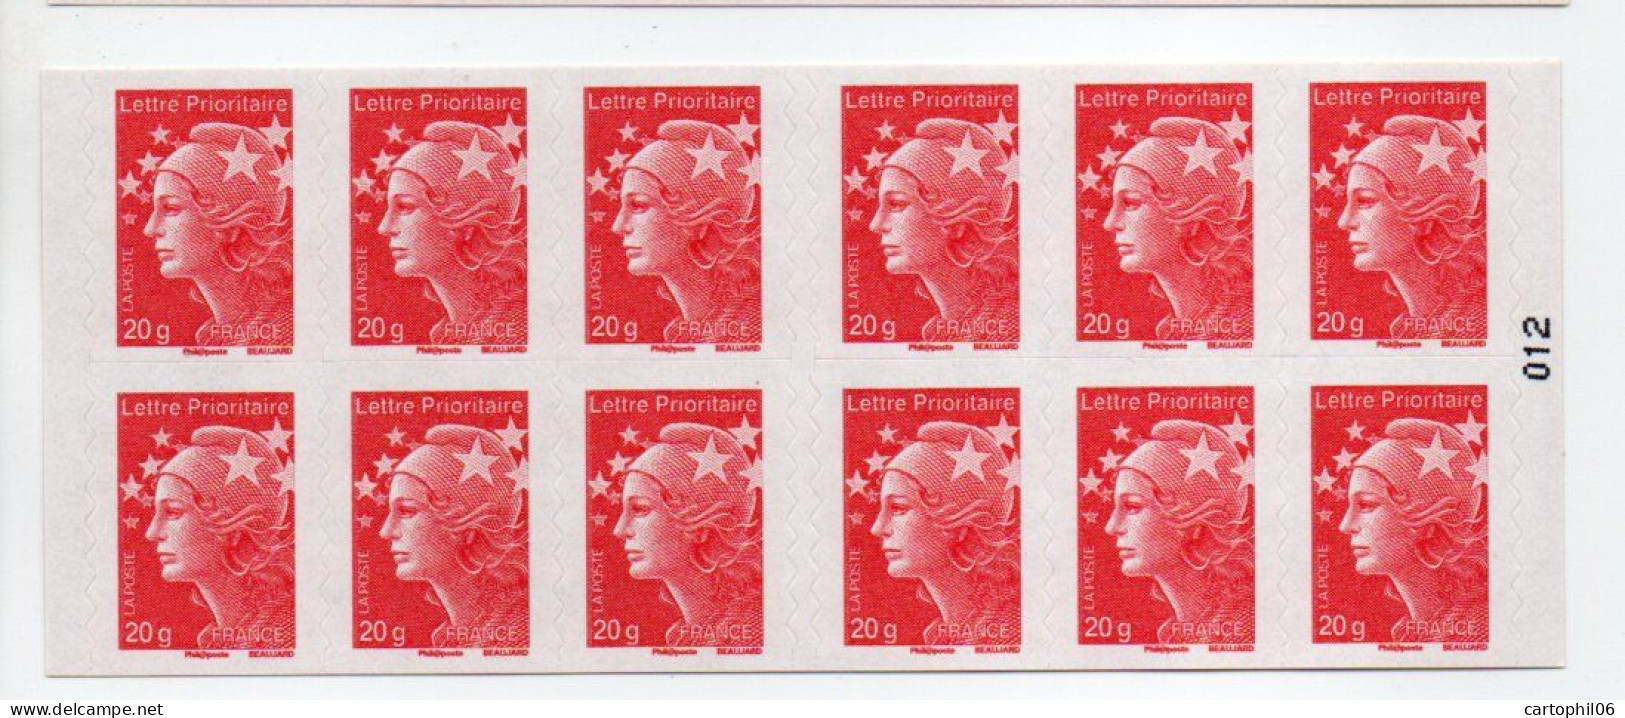 - FRANCE Carnet 12 Timbres Prioritaires Marianne De Beaujard - MON TIMBRAMOI - VALEUR FACIALE 17,16 € - - Modernes : 1959-...